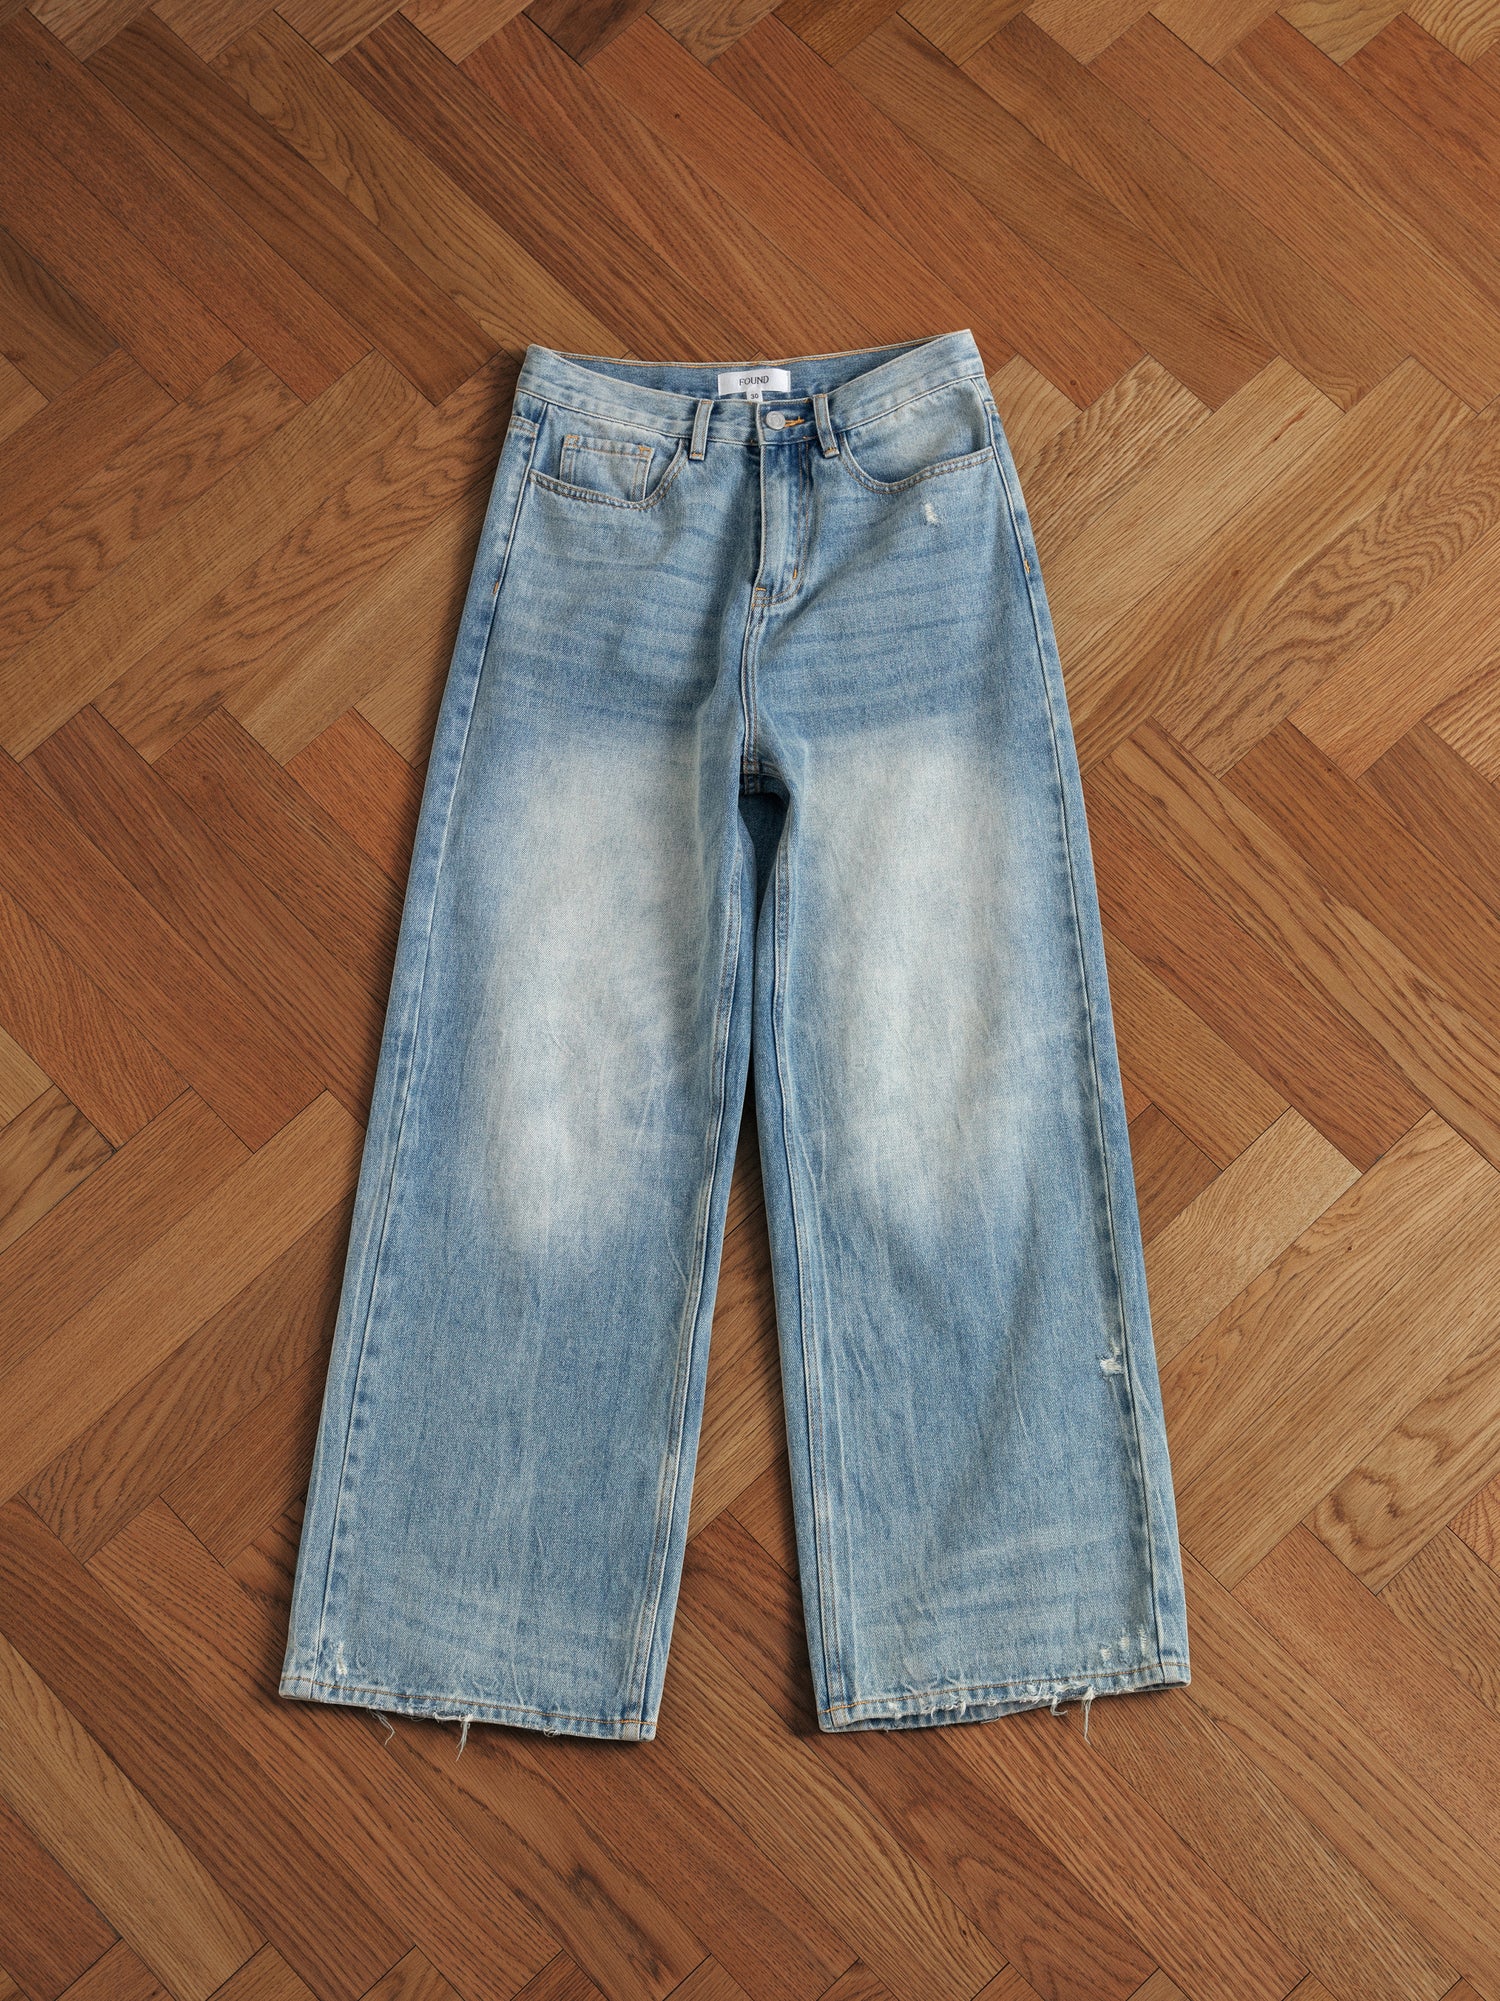 A pair of Found Lacy Baggy Jeans sitting on a wooden floor.